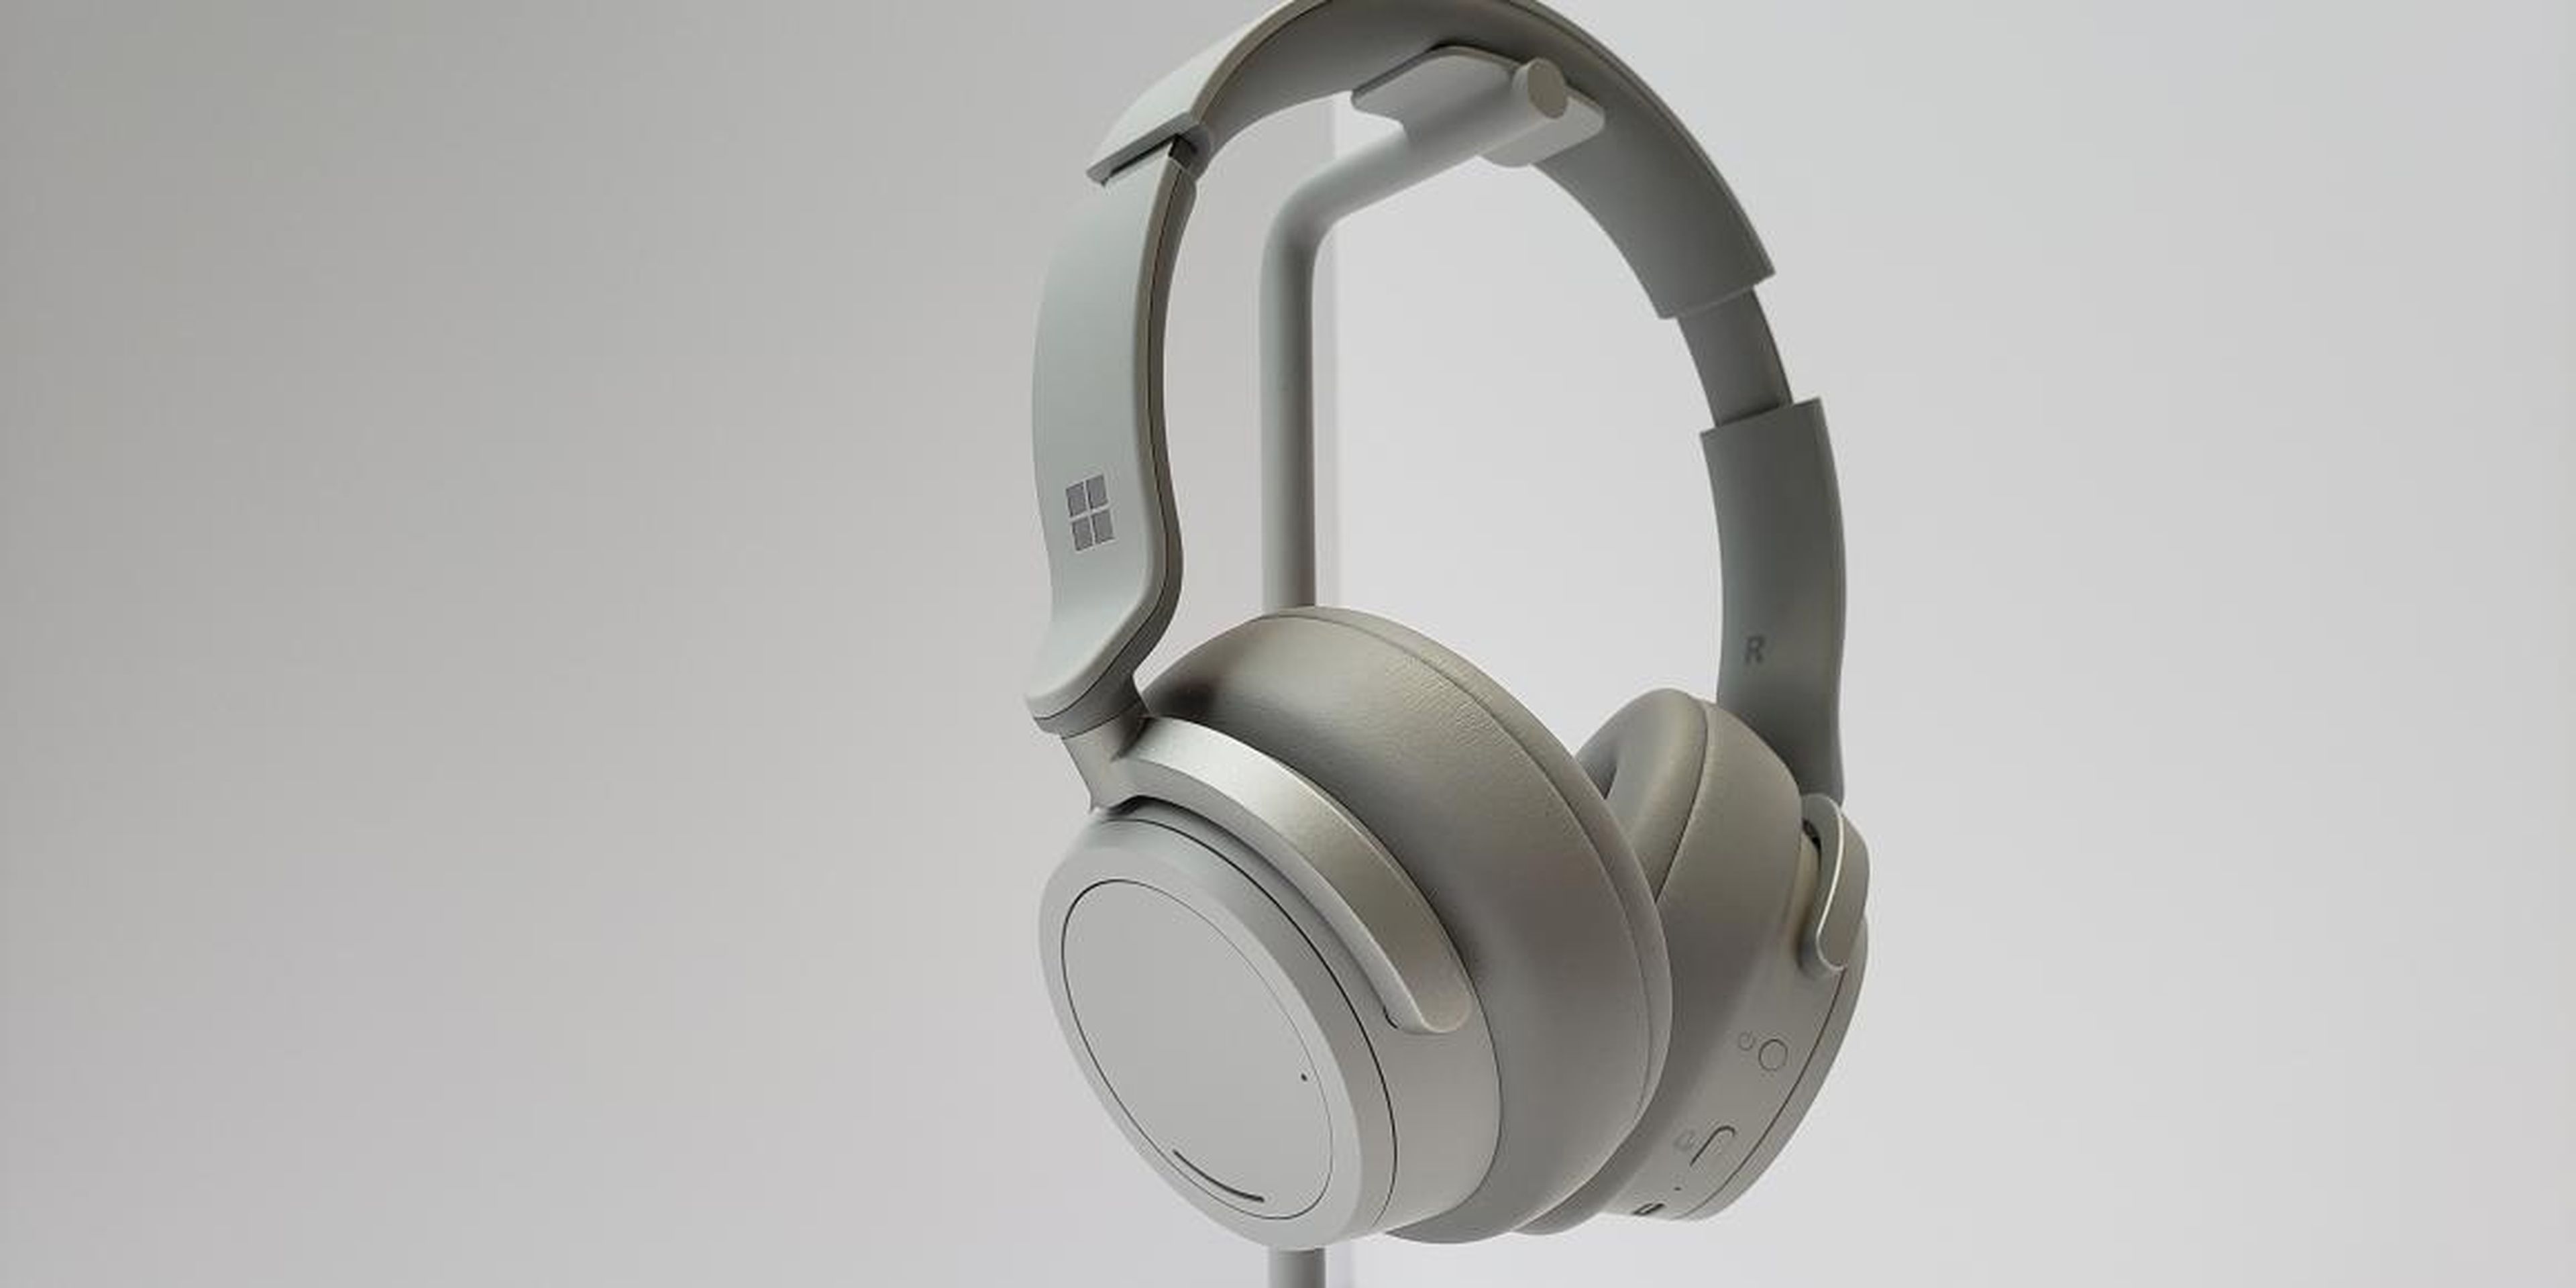 The $349 Microsoft Surface Headphones are noise-cancelling and let you talk to the Cortana voice assistant.